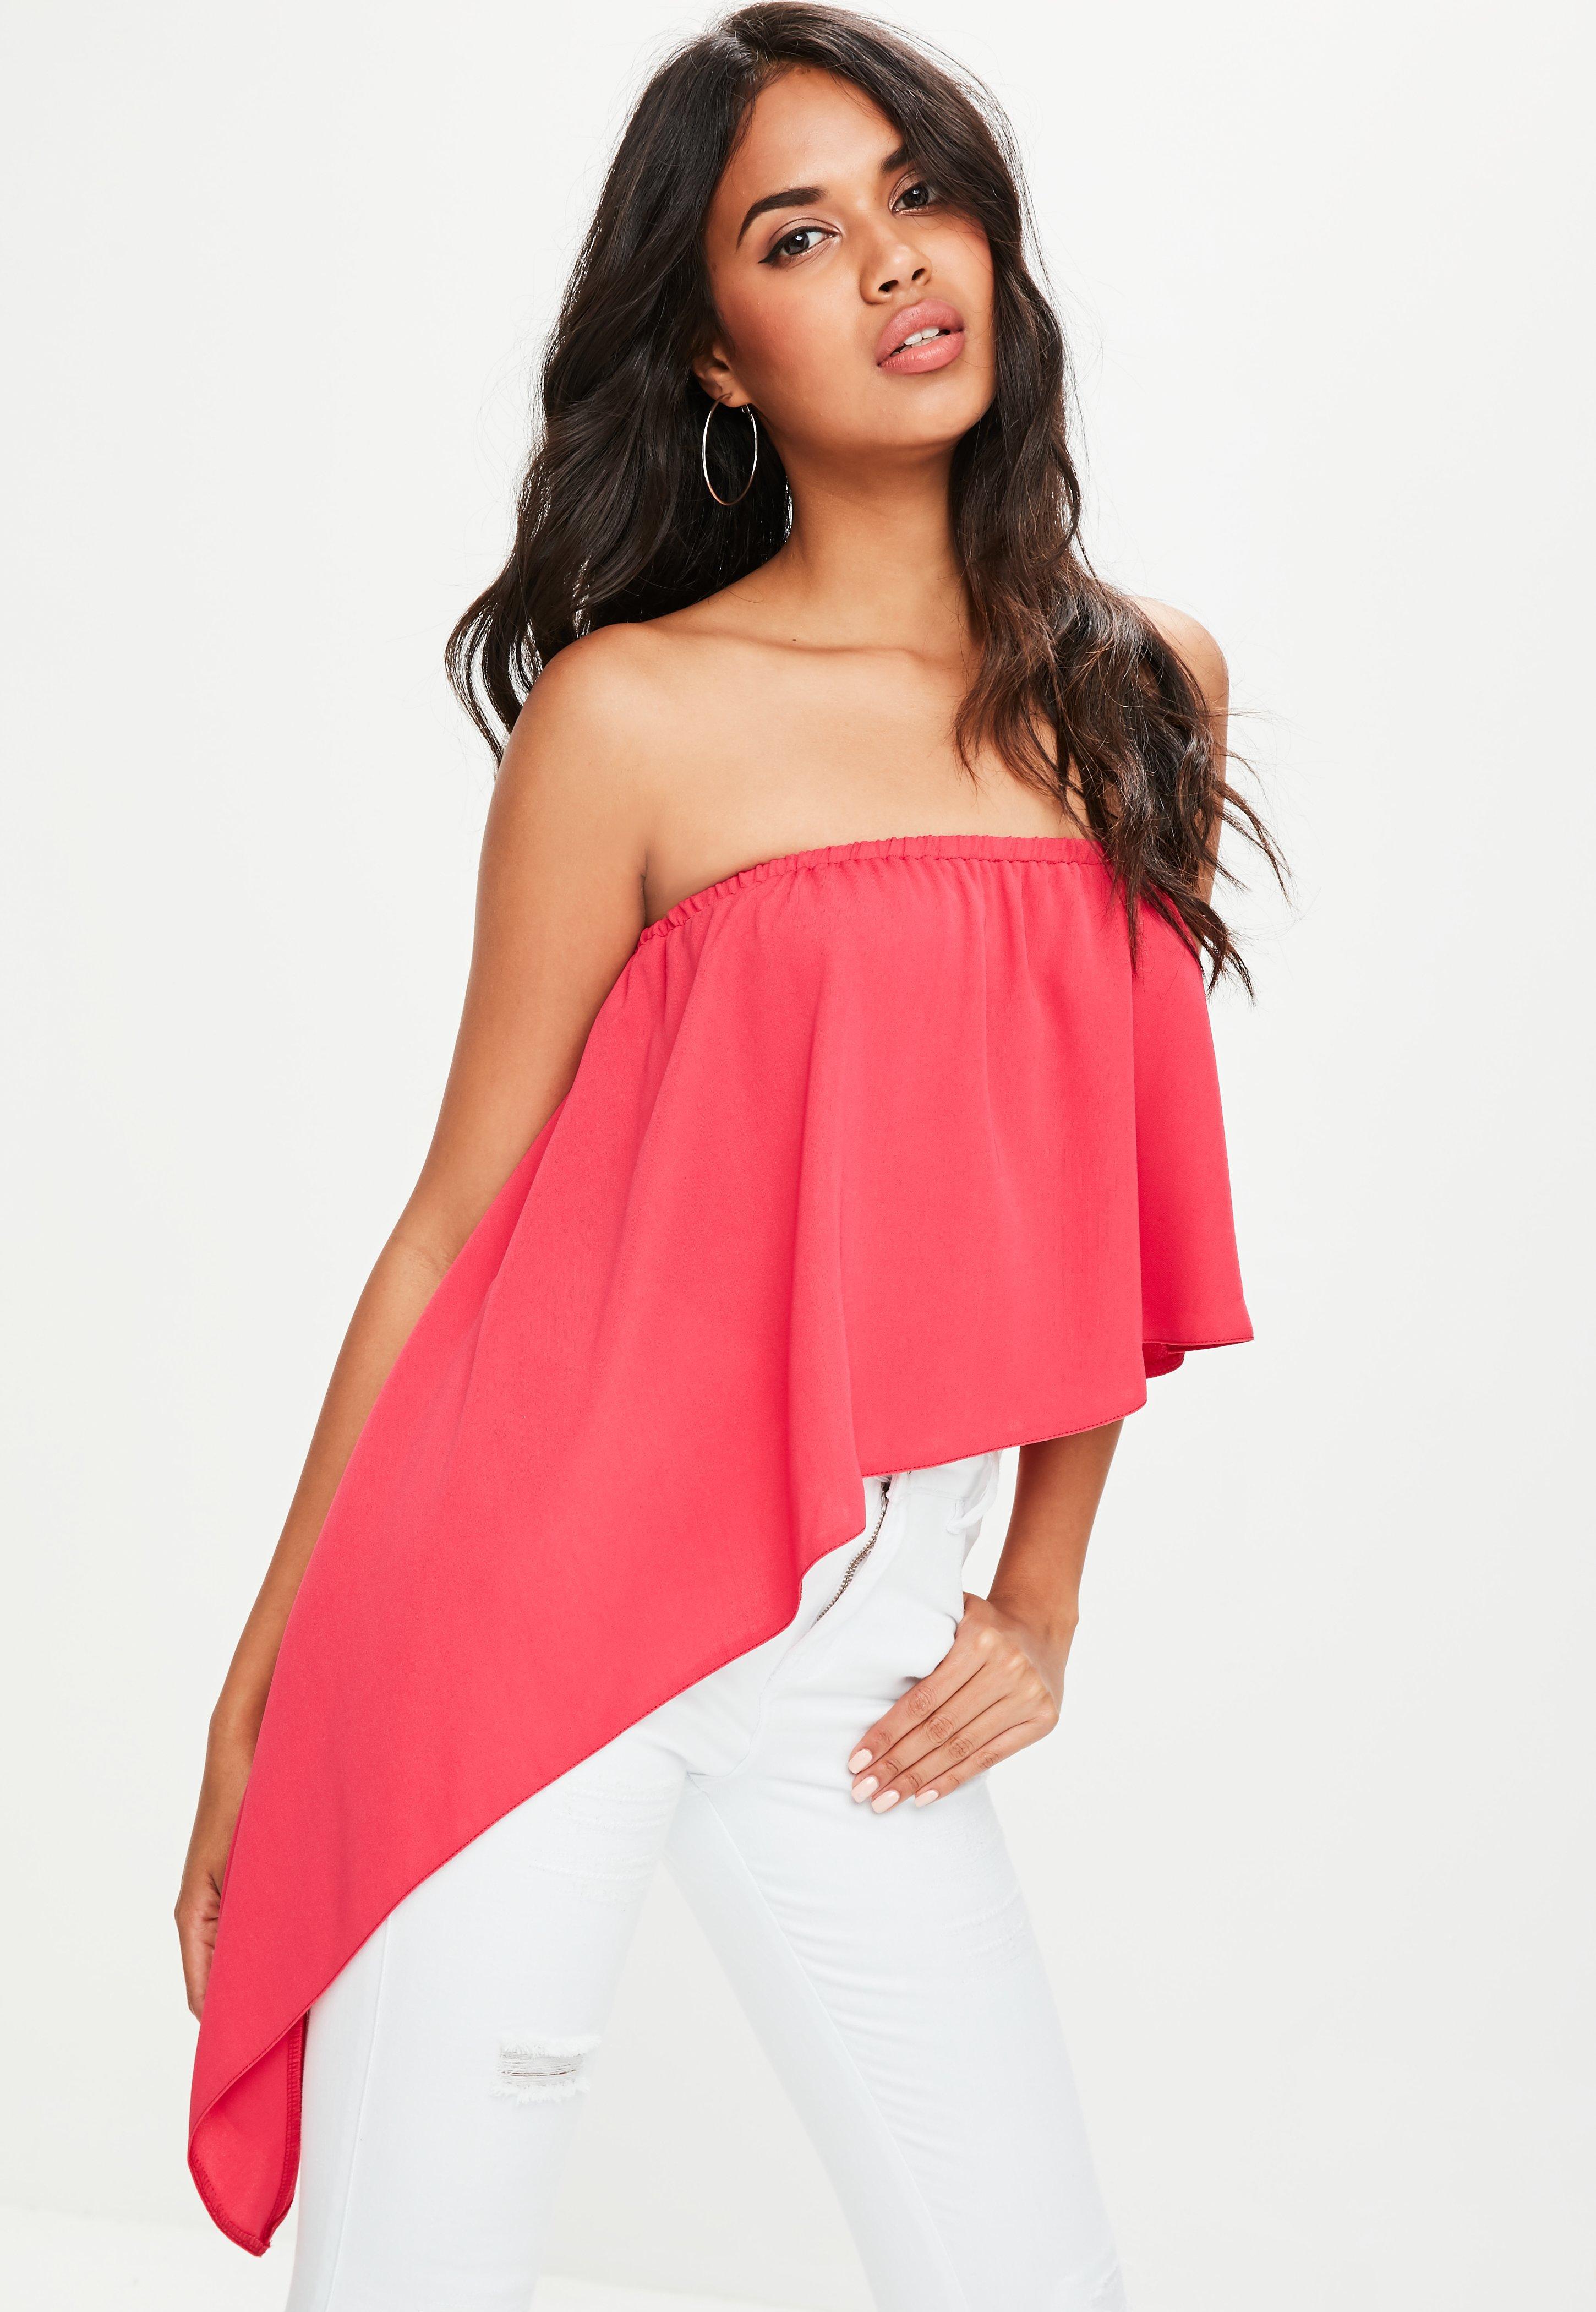 Lyst - Missguided Hot Pink Asymmetric Bandeau Top in Pink